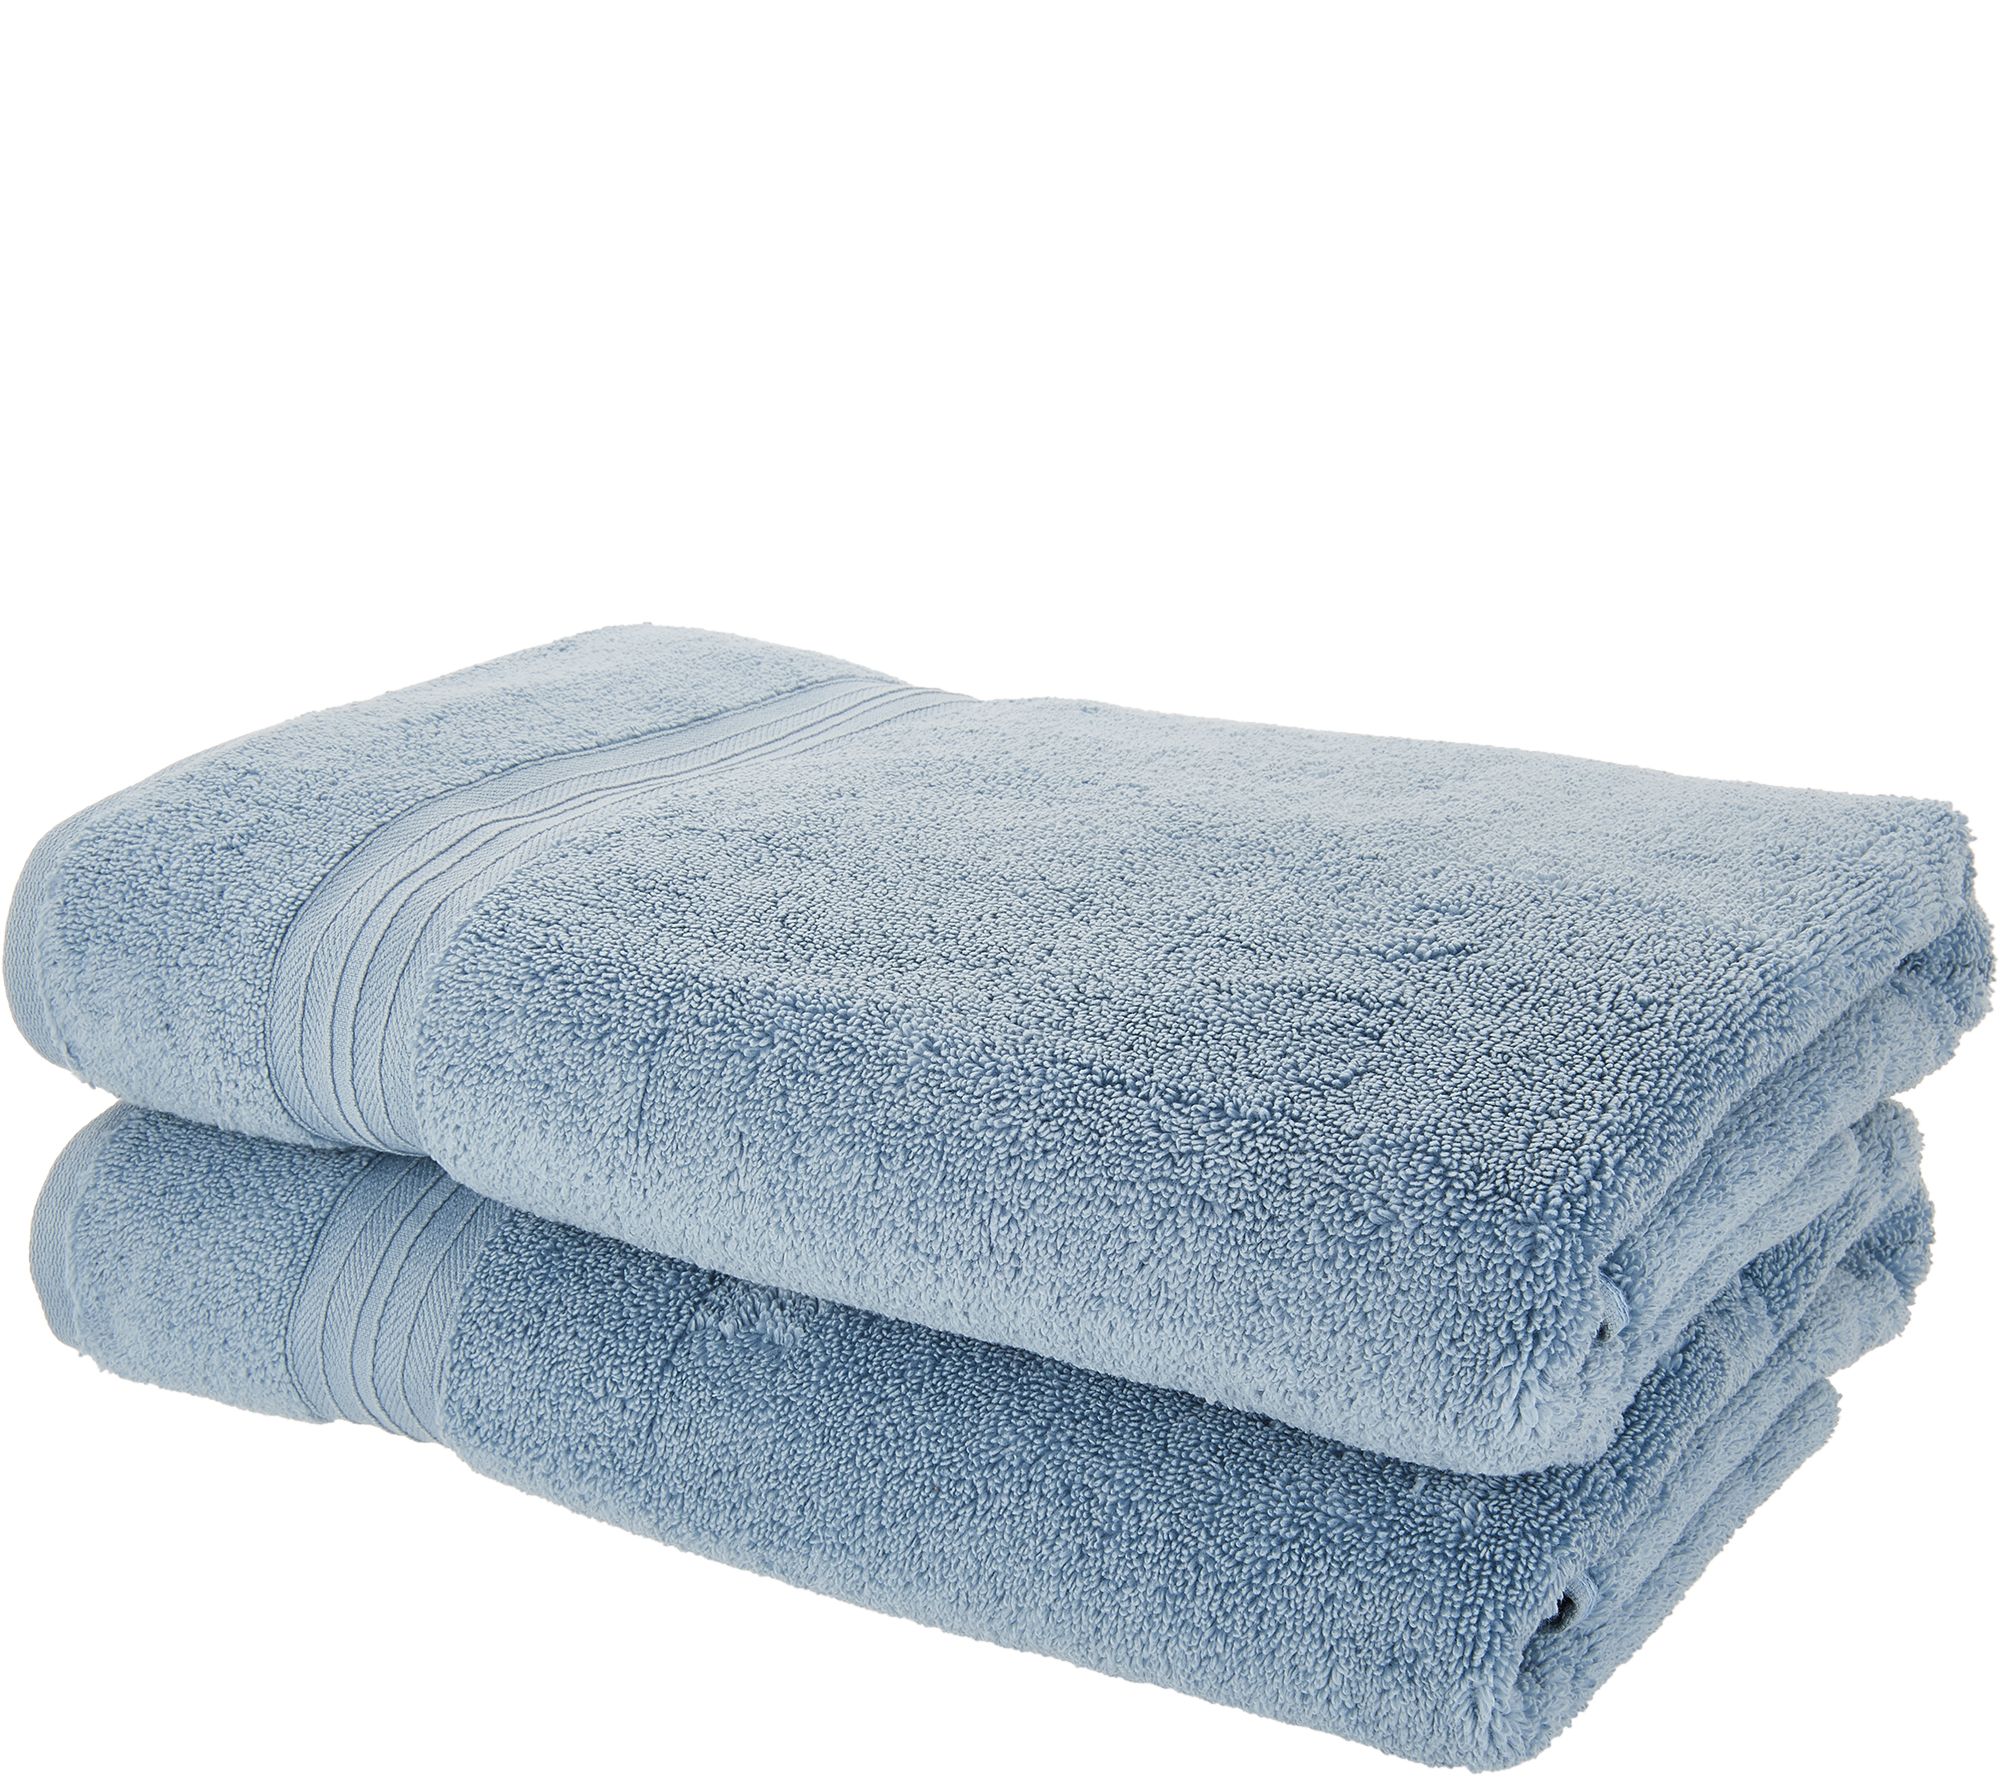 🧖🏻‍♀️ Bath Towels at Costco are a GREAT Deal! These 100% cotton towe, Bath  Towels